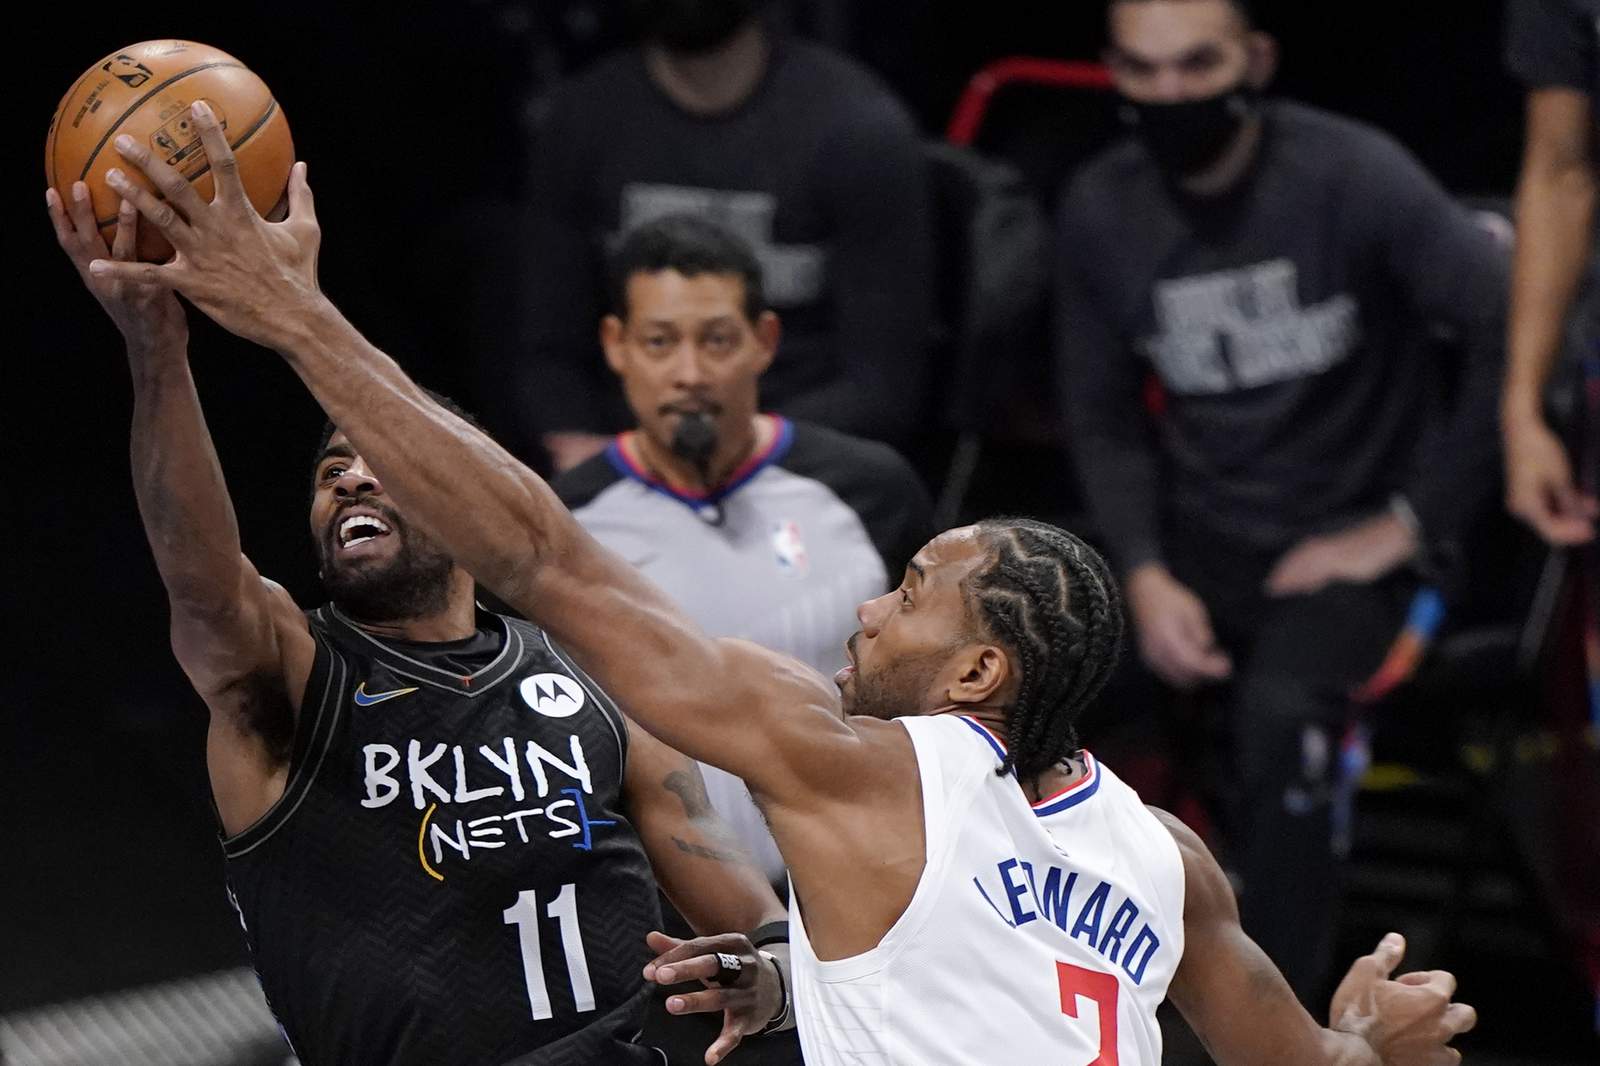 Net gains: Expectations soar in Brooklyn with Durant, Kyrie ready